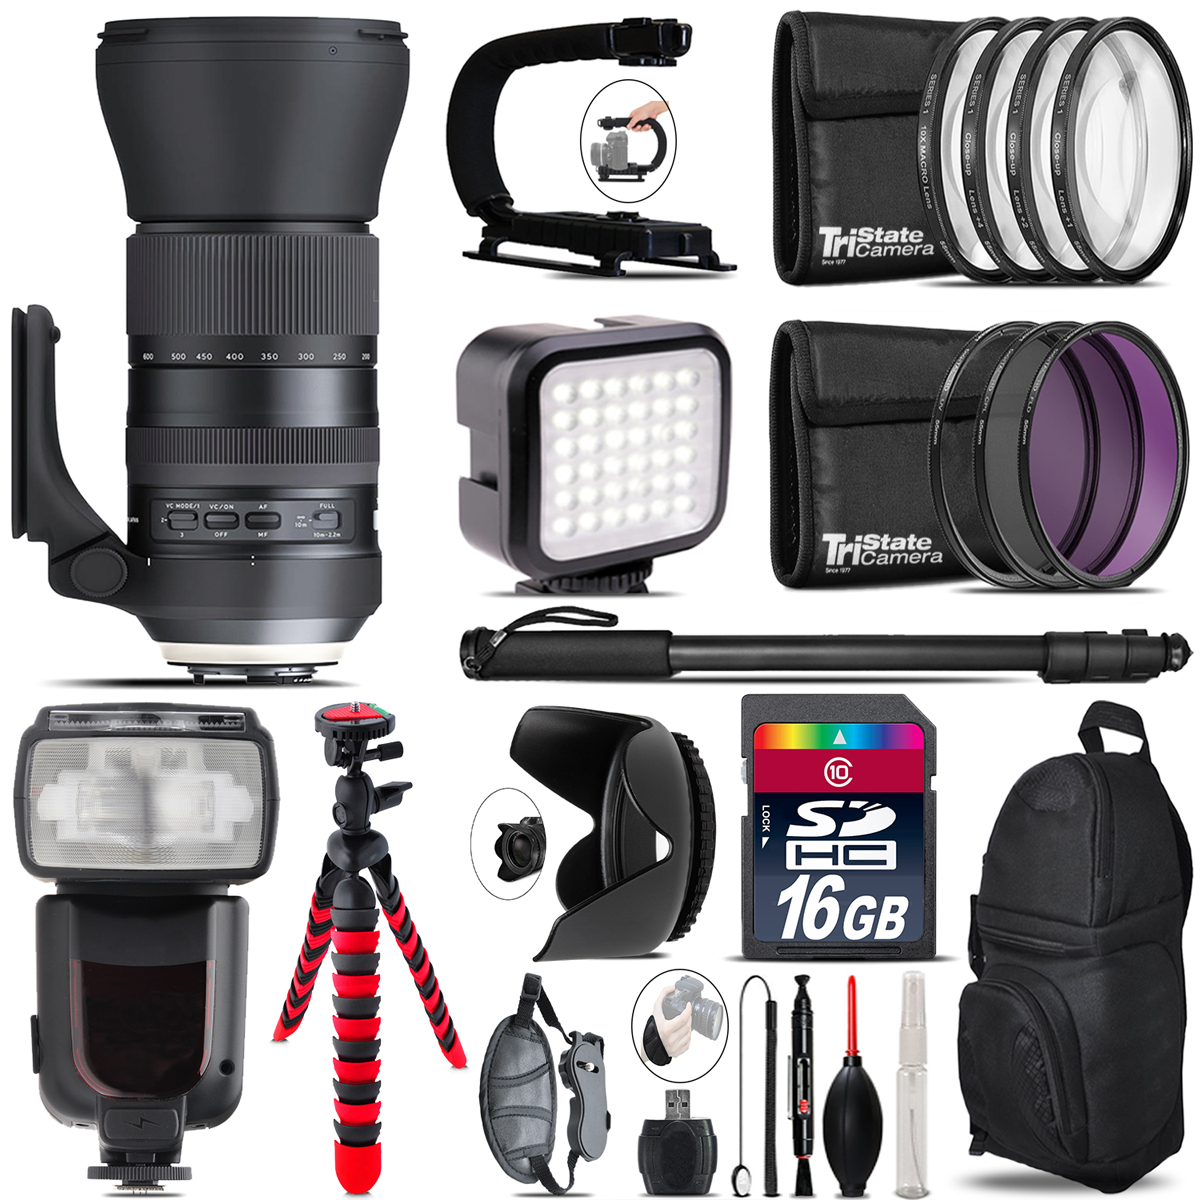 Tamron 150-600mm G2 for Canon - Video Kit + Pro Flash - 16GB Accessory Bundle *FREE SHIPPING*